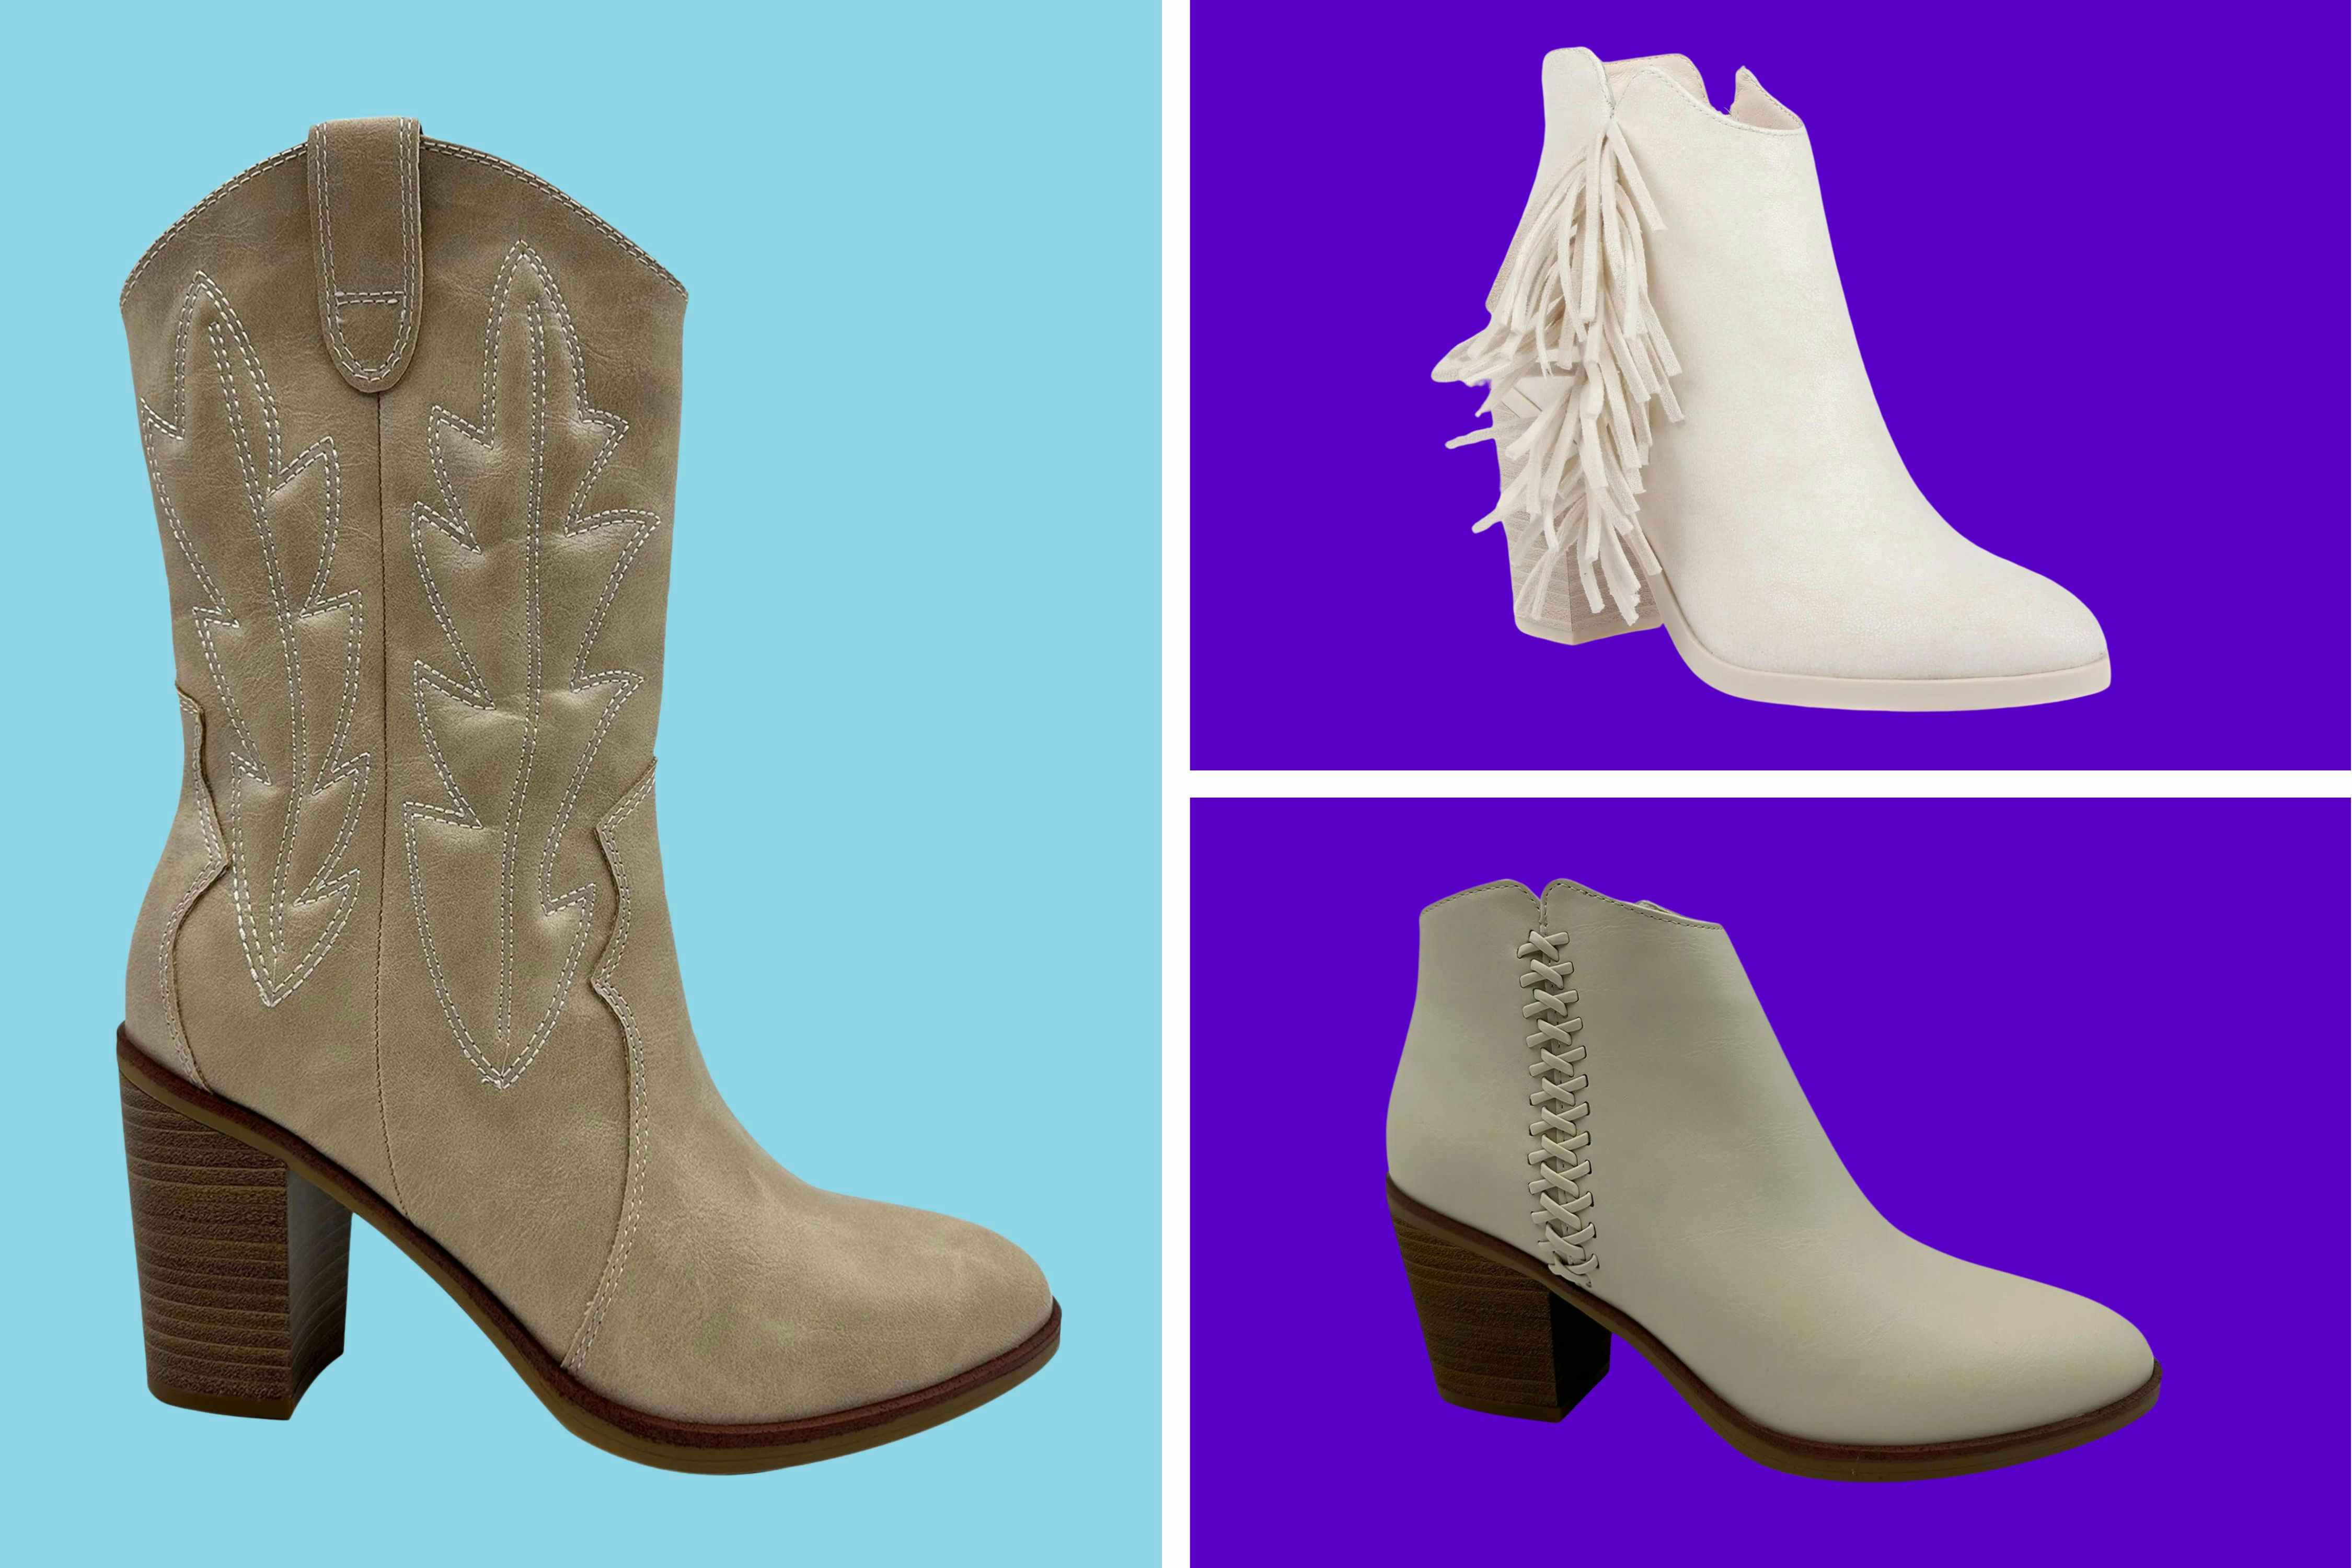 Score Women's Boots for as Low as $14.98 at Walmart — Up to 81% Off